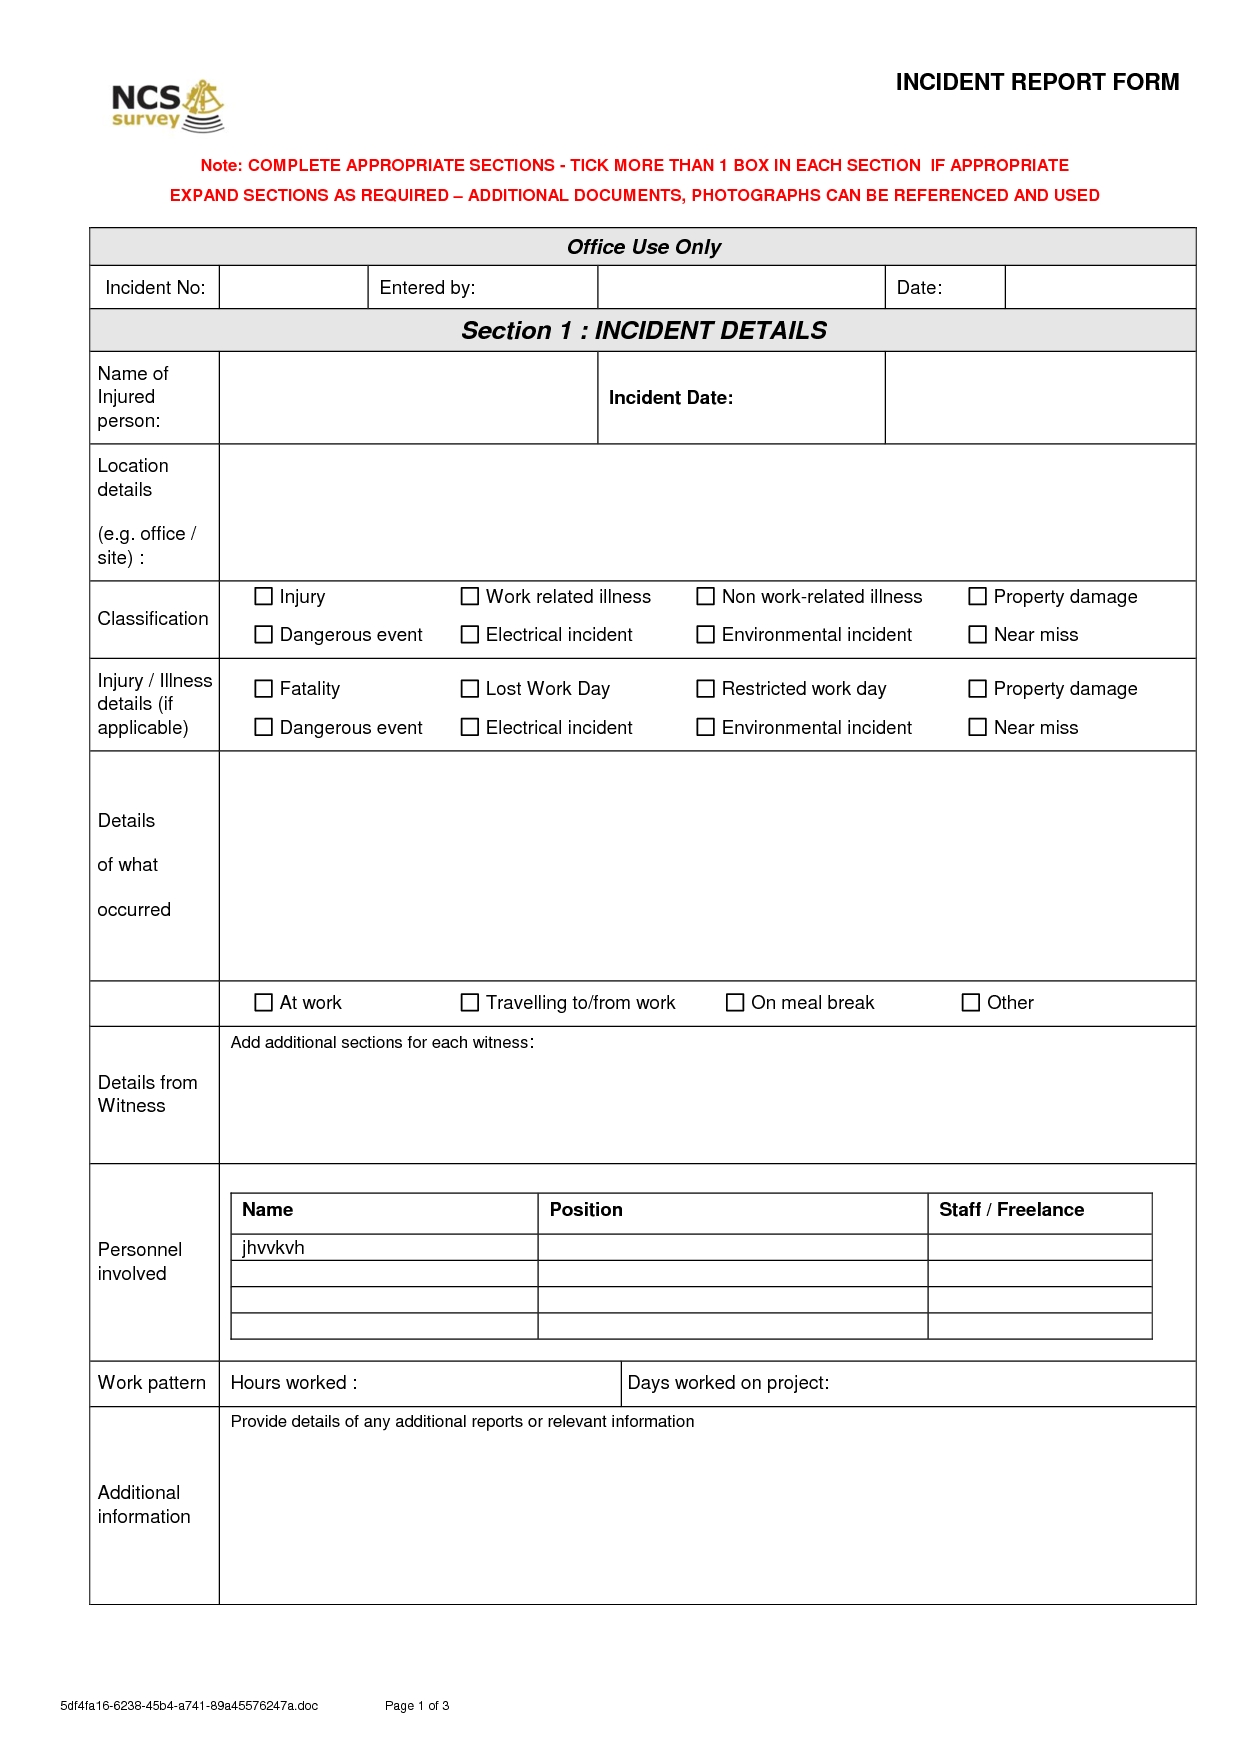 Accident Near Miss Report Form Template | Doctemplates With Regard To Near Miss Incident Report Template